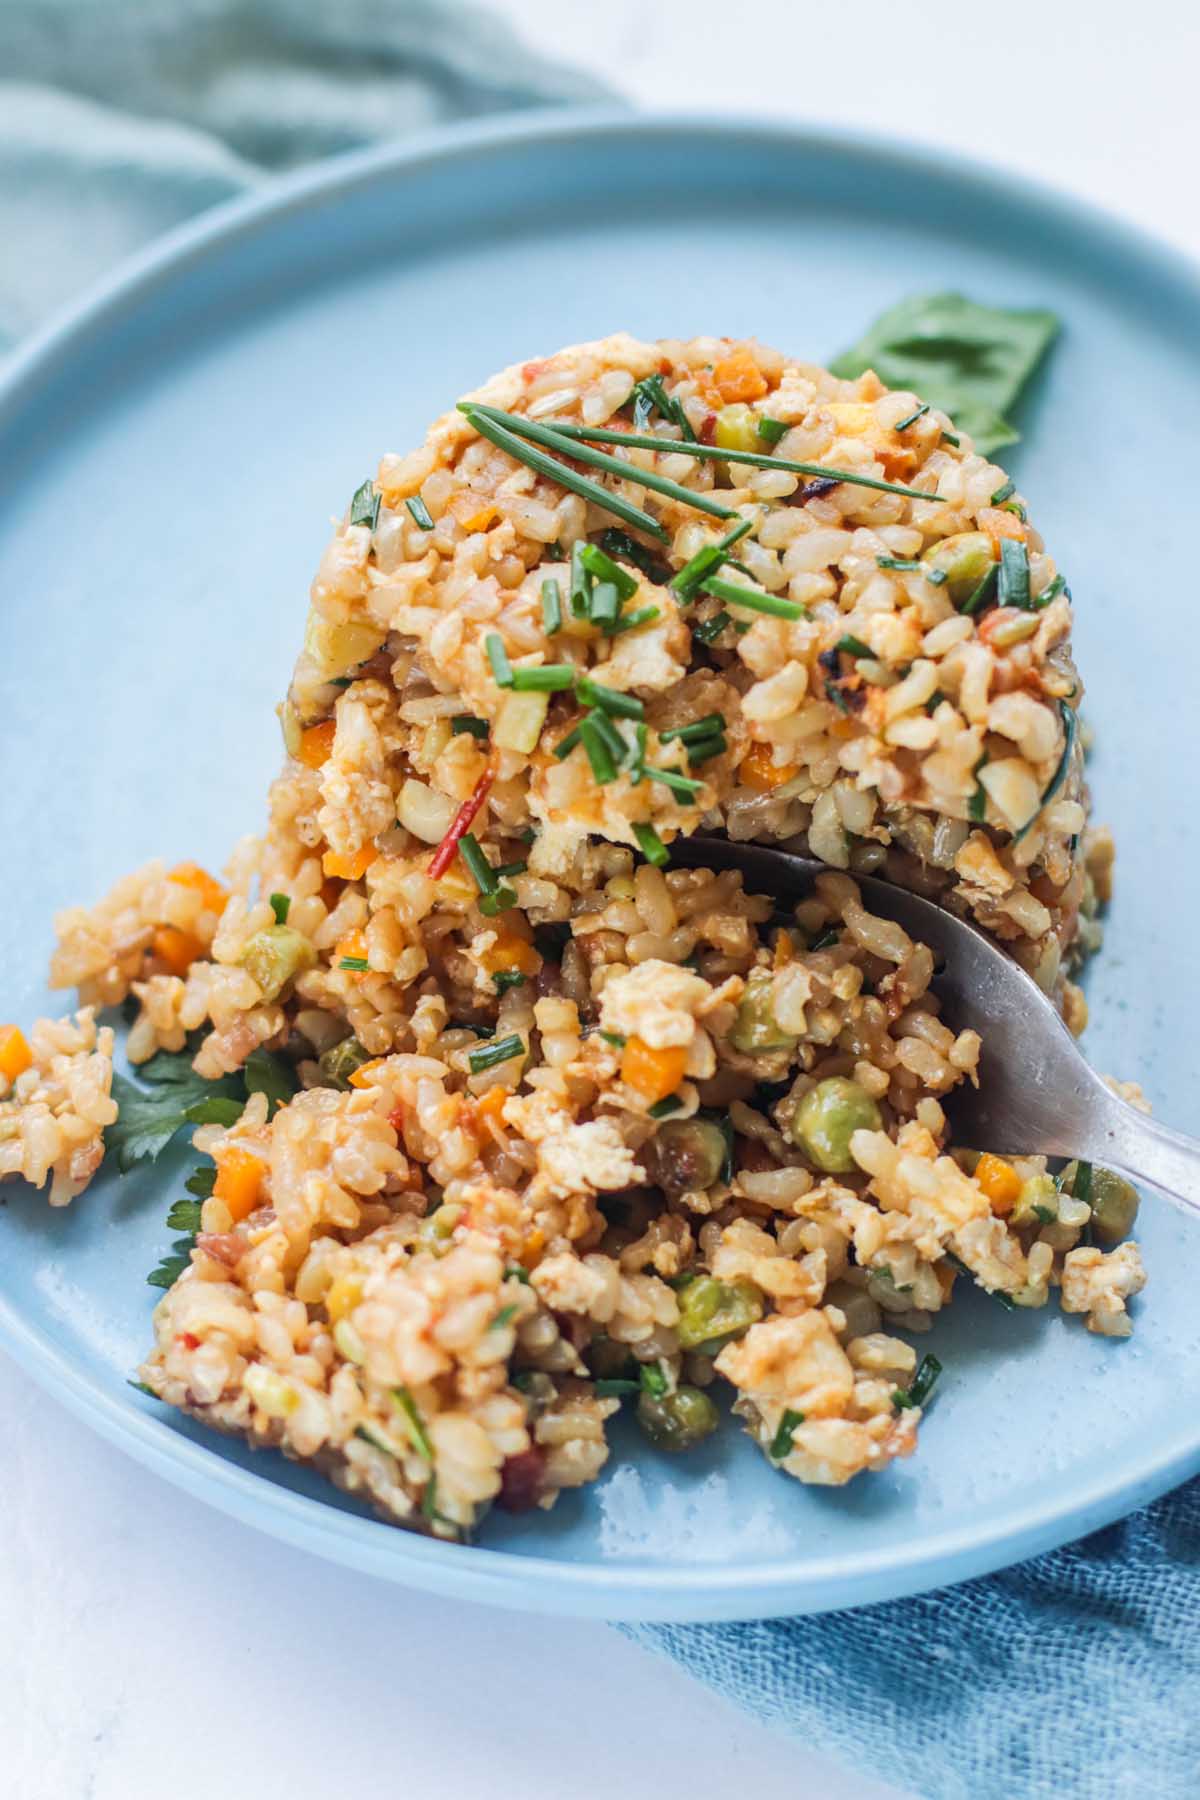 A scoop of fried rice on a plate.